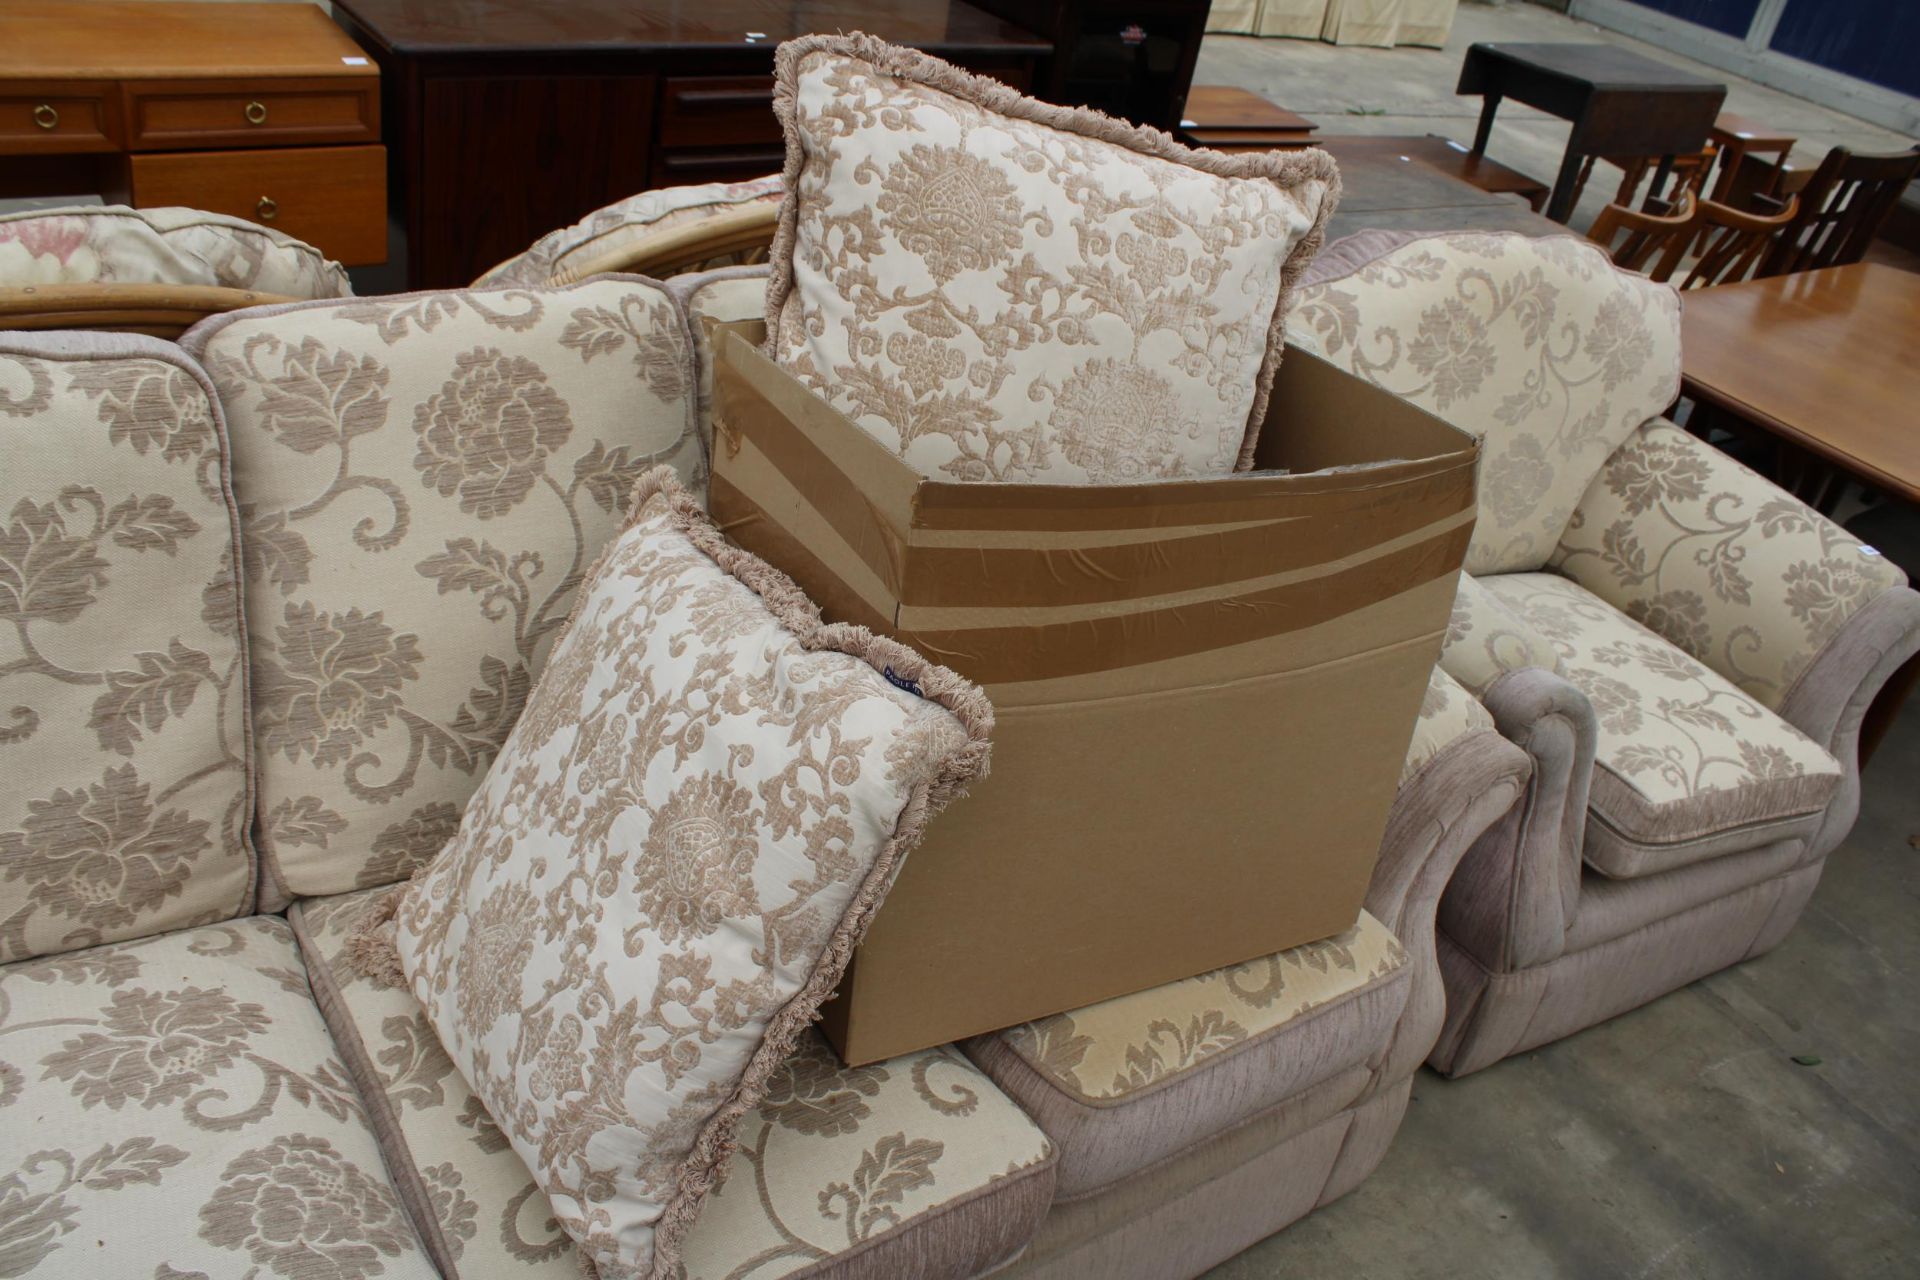 A MODERN FLORAL THREE PIECE SUITE WITH SIX LOOSE CUSHIONS - Image 6 of 6